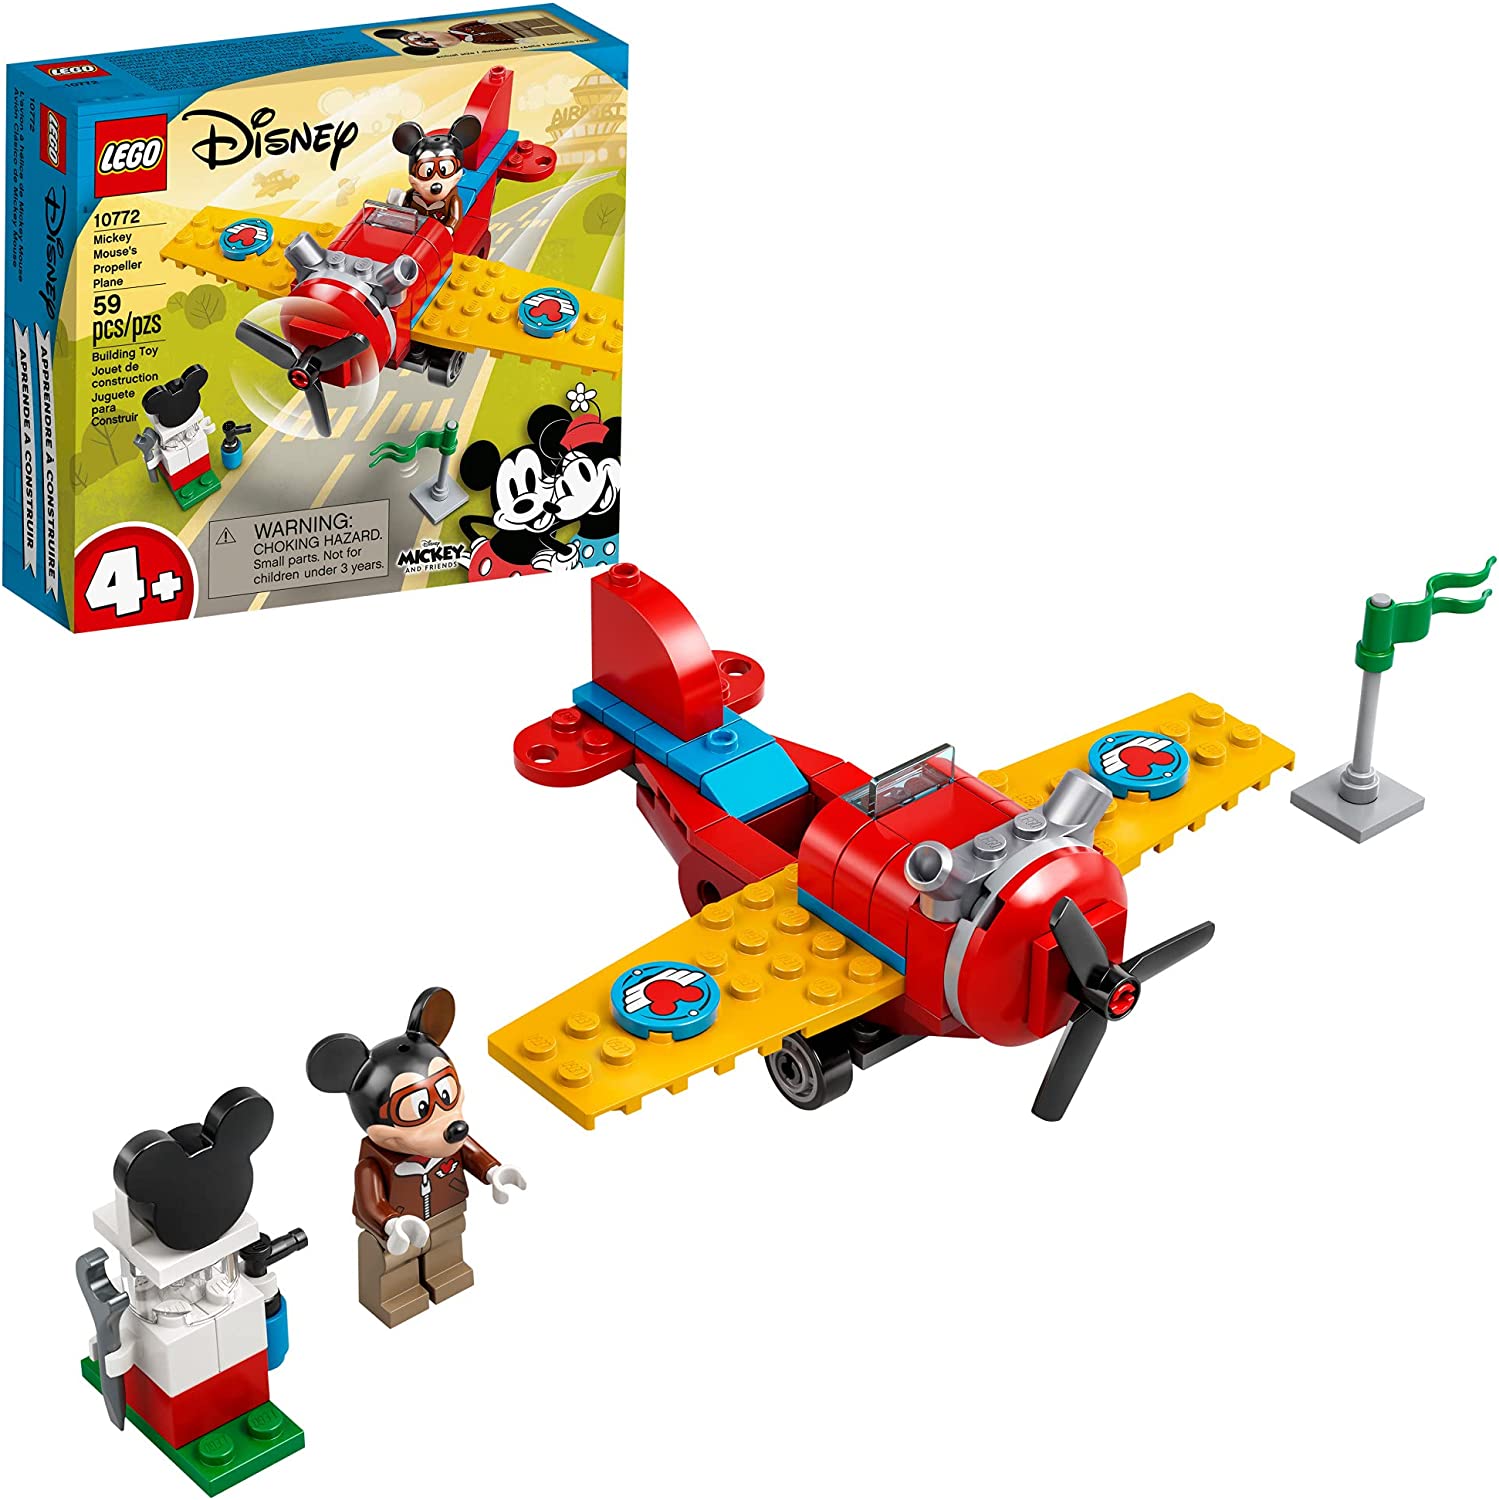 59-Pc LEGO Disney Mickey Mouse's Propeller Plane Building Playset $7 + FS w/ Amazon Prime or FS on $25+